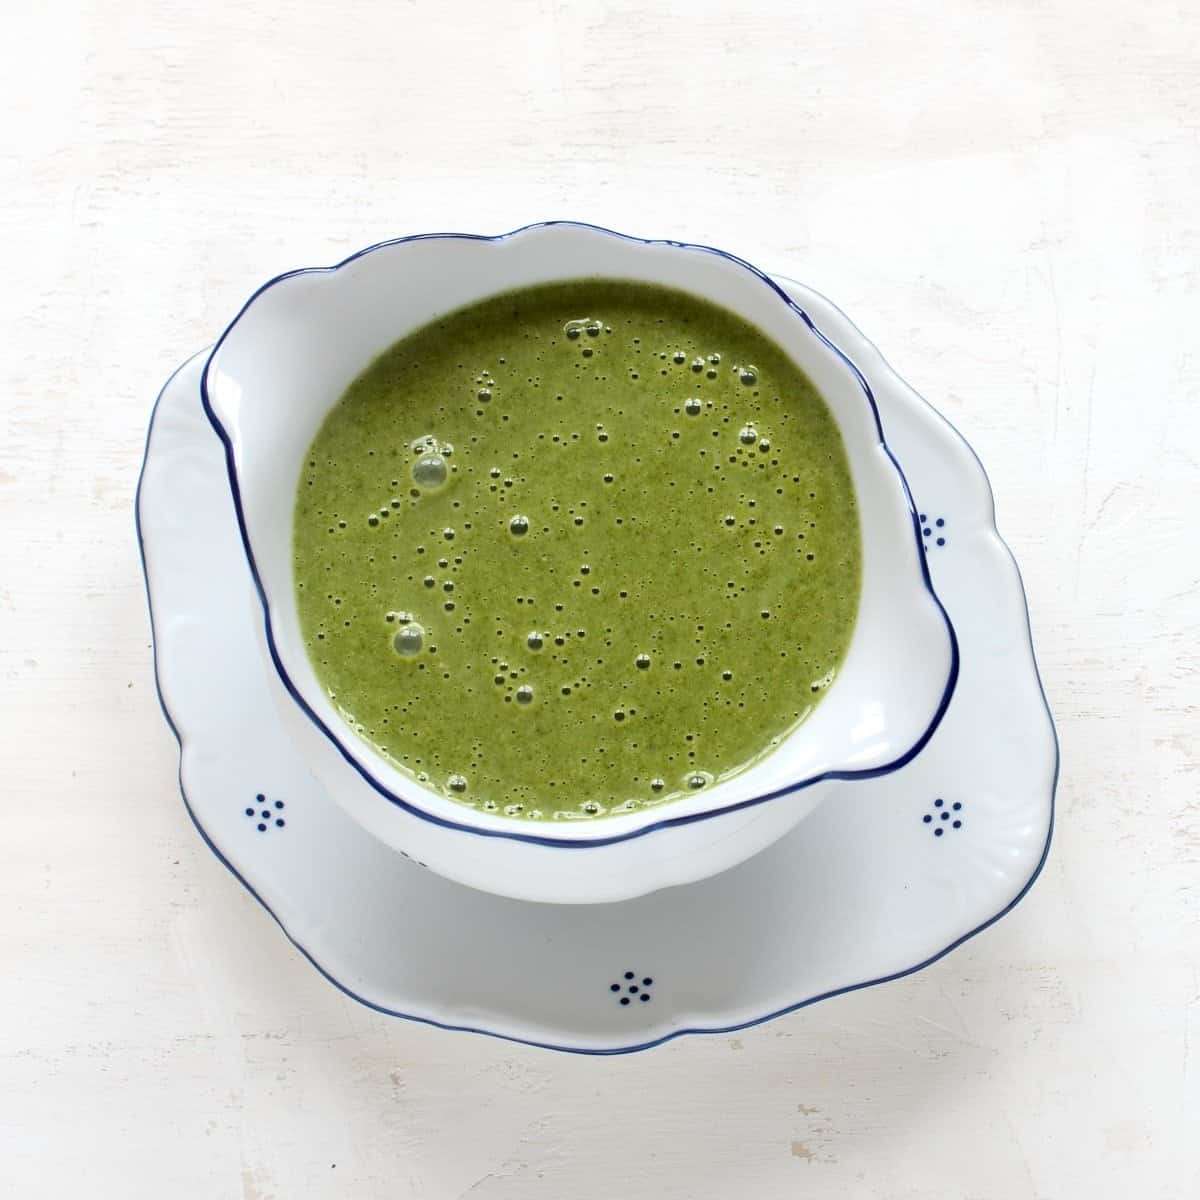 Green spinach sauce in a bowl.